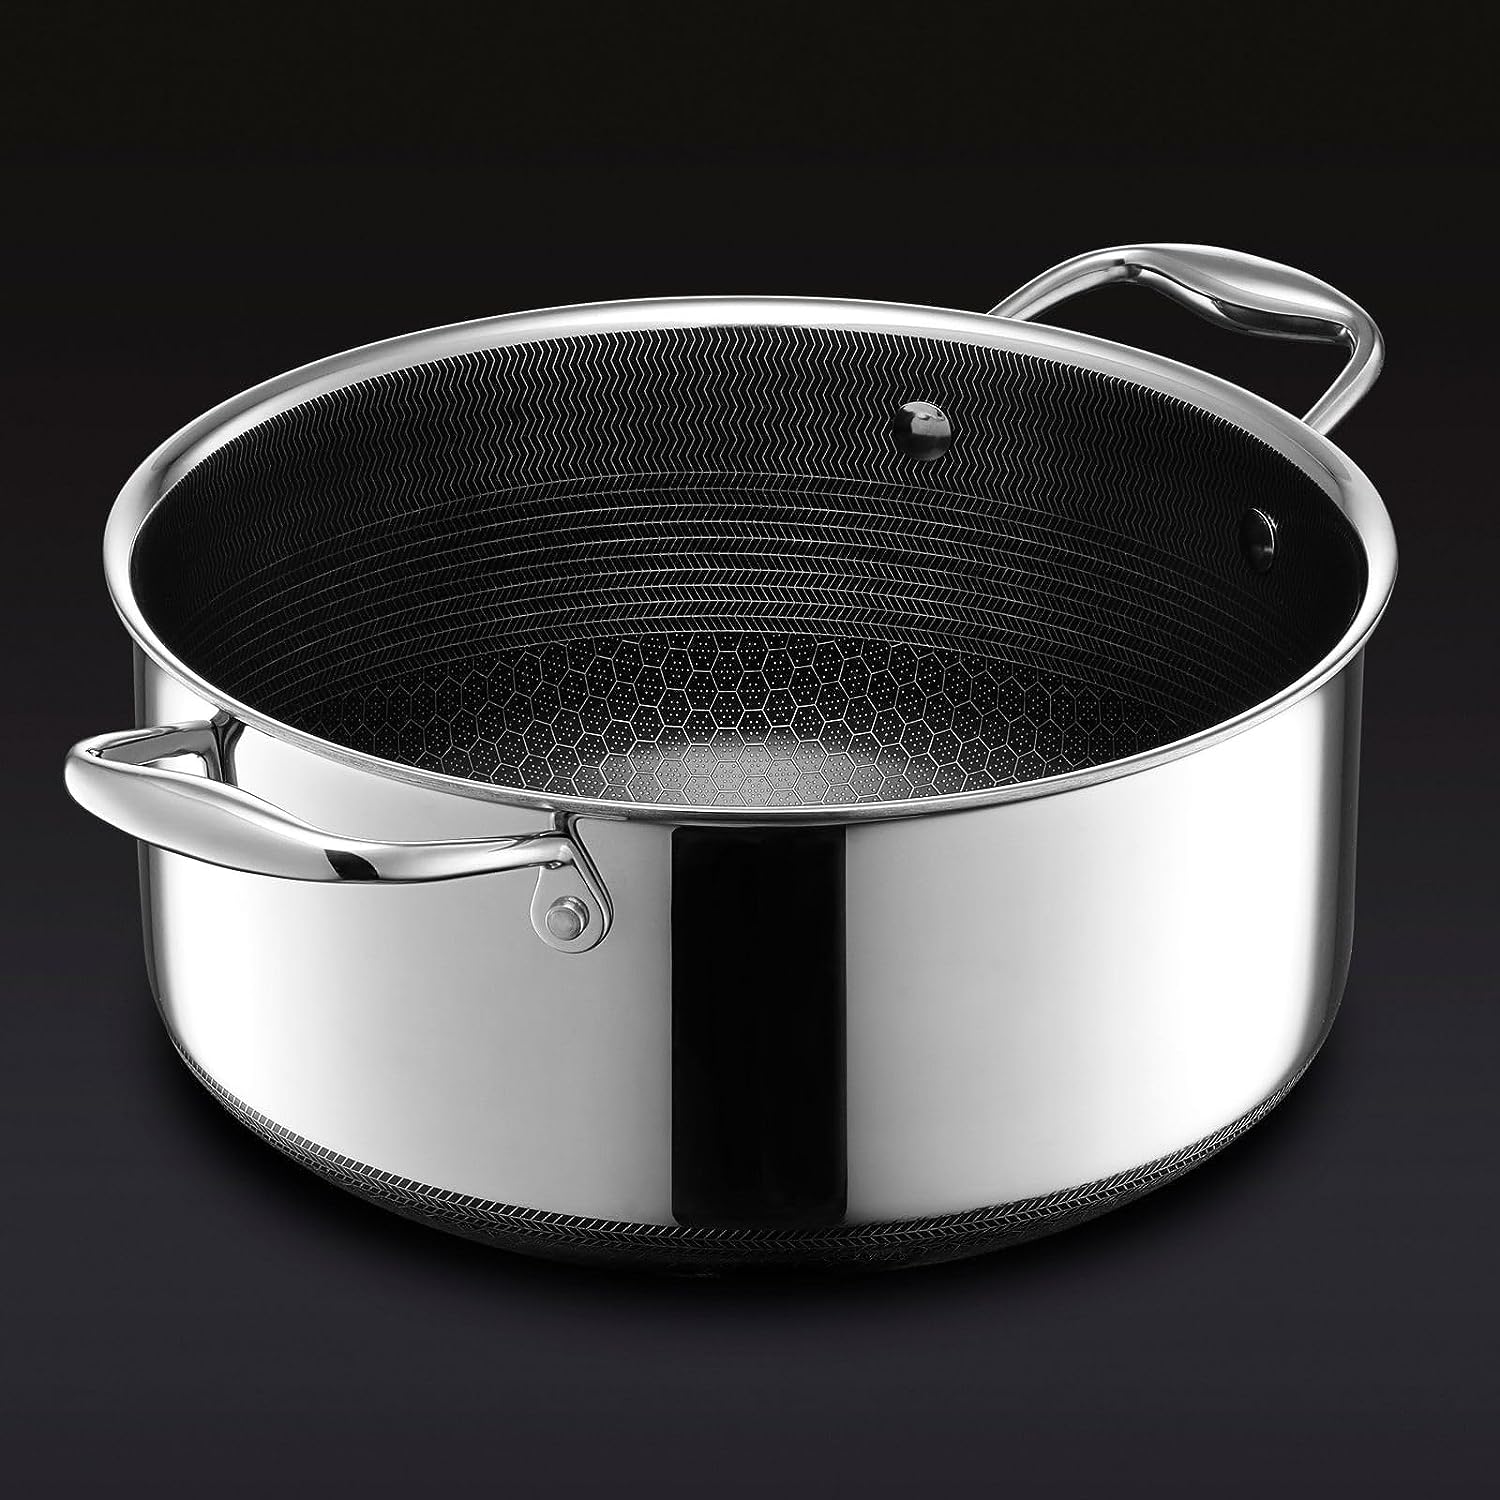 https://bigbigmart.com/wp-content/uploads/2023/09/HexClad-5-Quart-Hybrid-Nonstick-Dutch-Oven-and-Lid-Dishwasher-and-Oven-Friendly-Compatible-with-All-Cooktops1.jpg